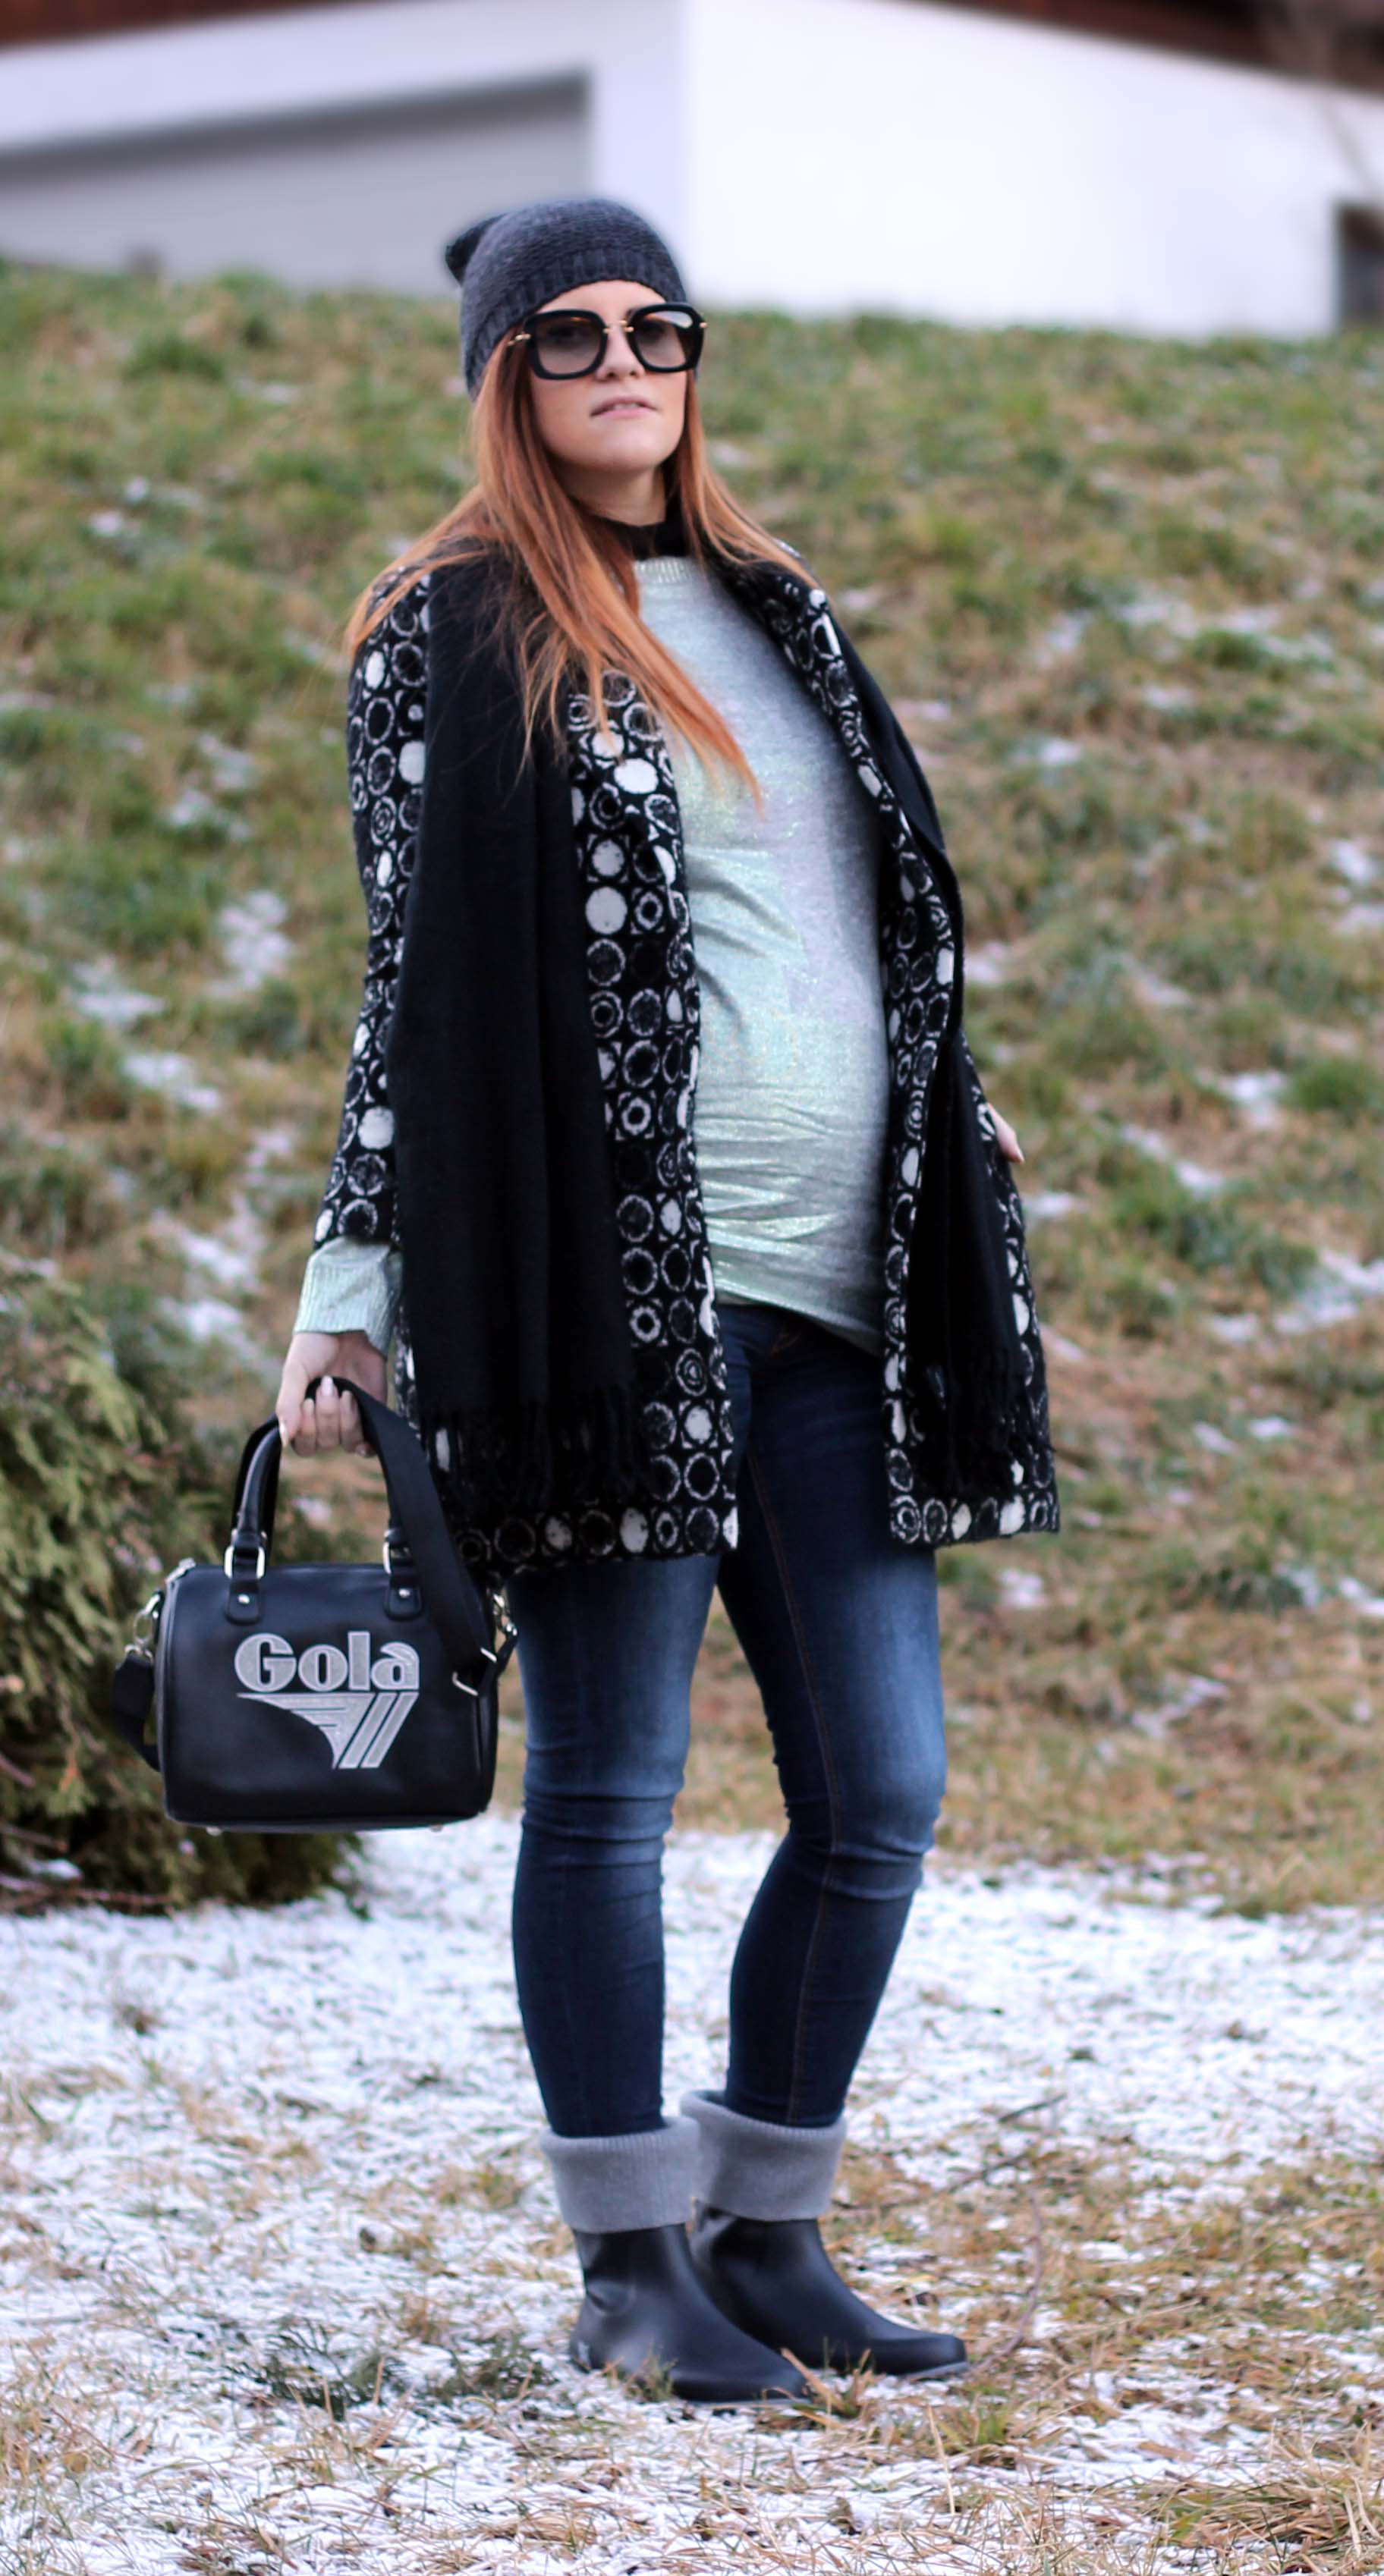 FASHION BLOGGER INCINTA - OUTFIT INVERNALE